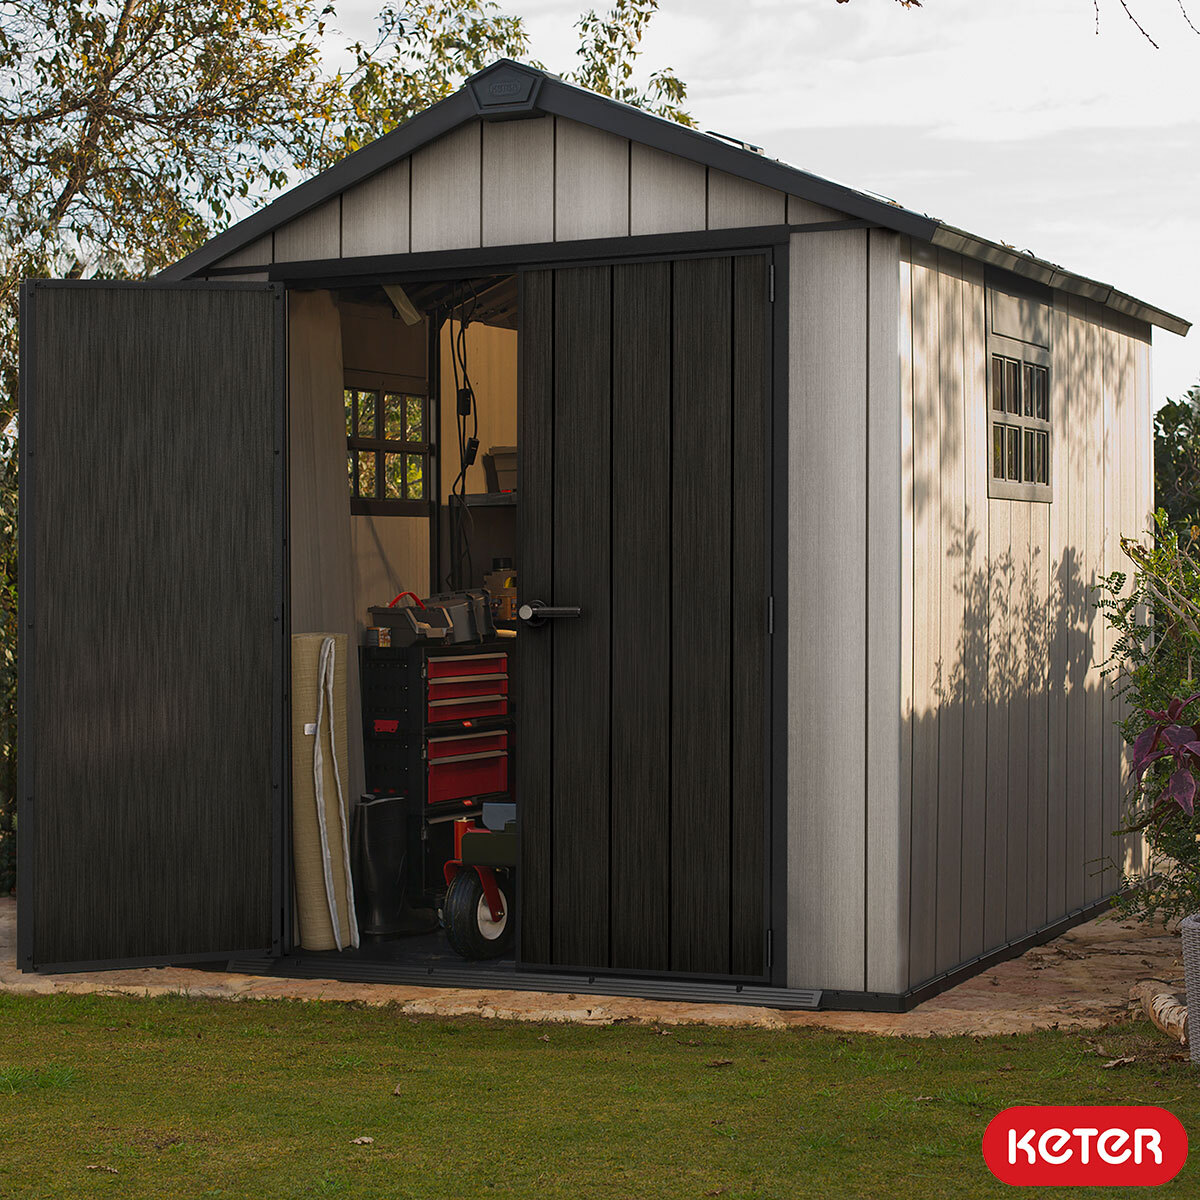 Keter Oakland 7ft 6" x 11ft (2.3 x 3.4m) Shed